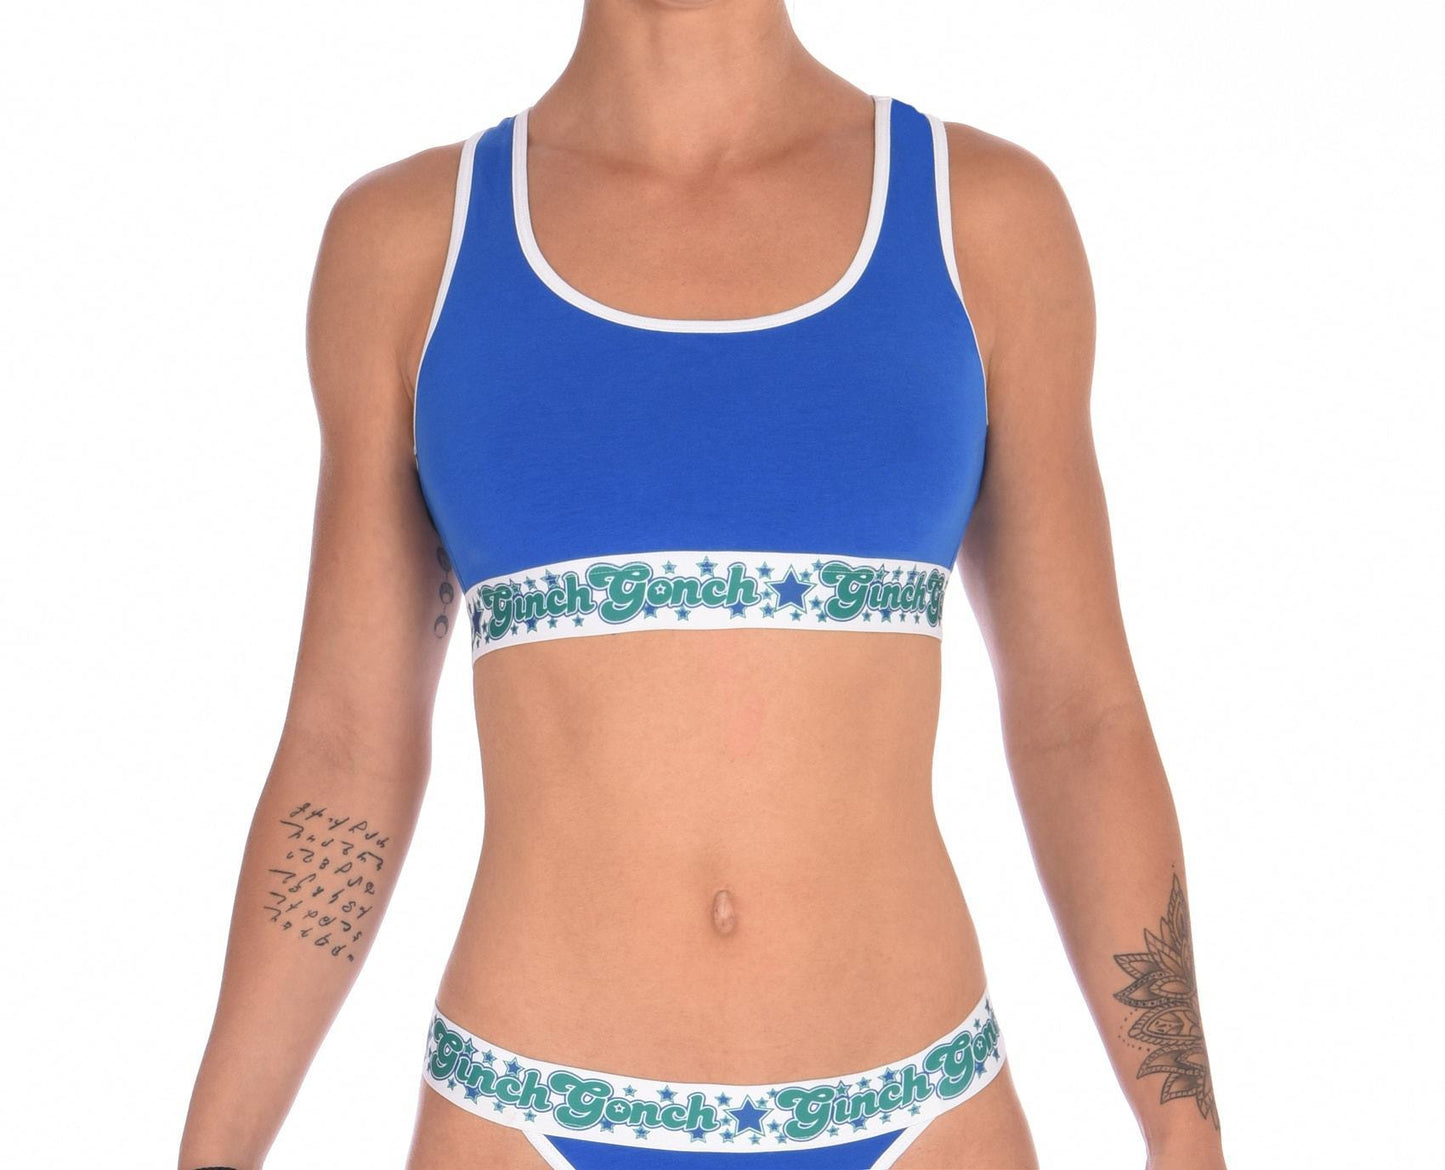 ginch gonch blue lagoon women's sports bra blue fabric with white trim printed thick band with ginch gonch logo and stars in blue and green front